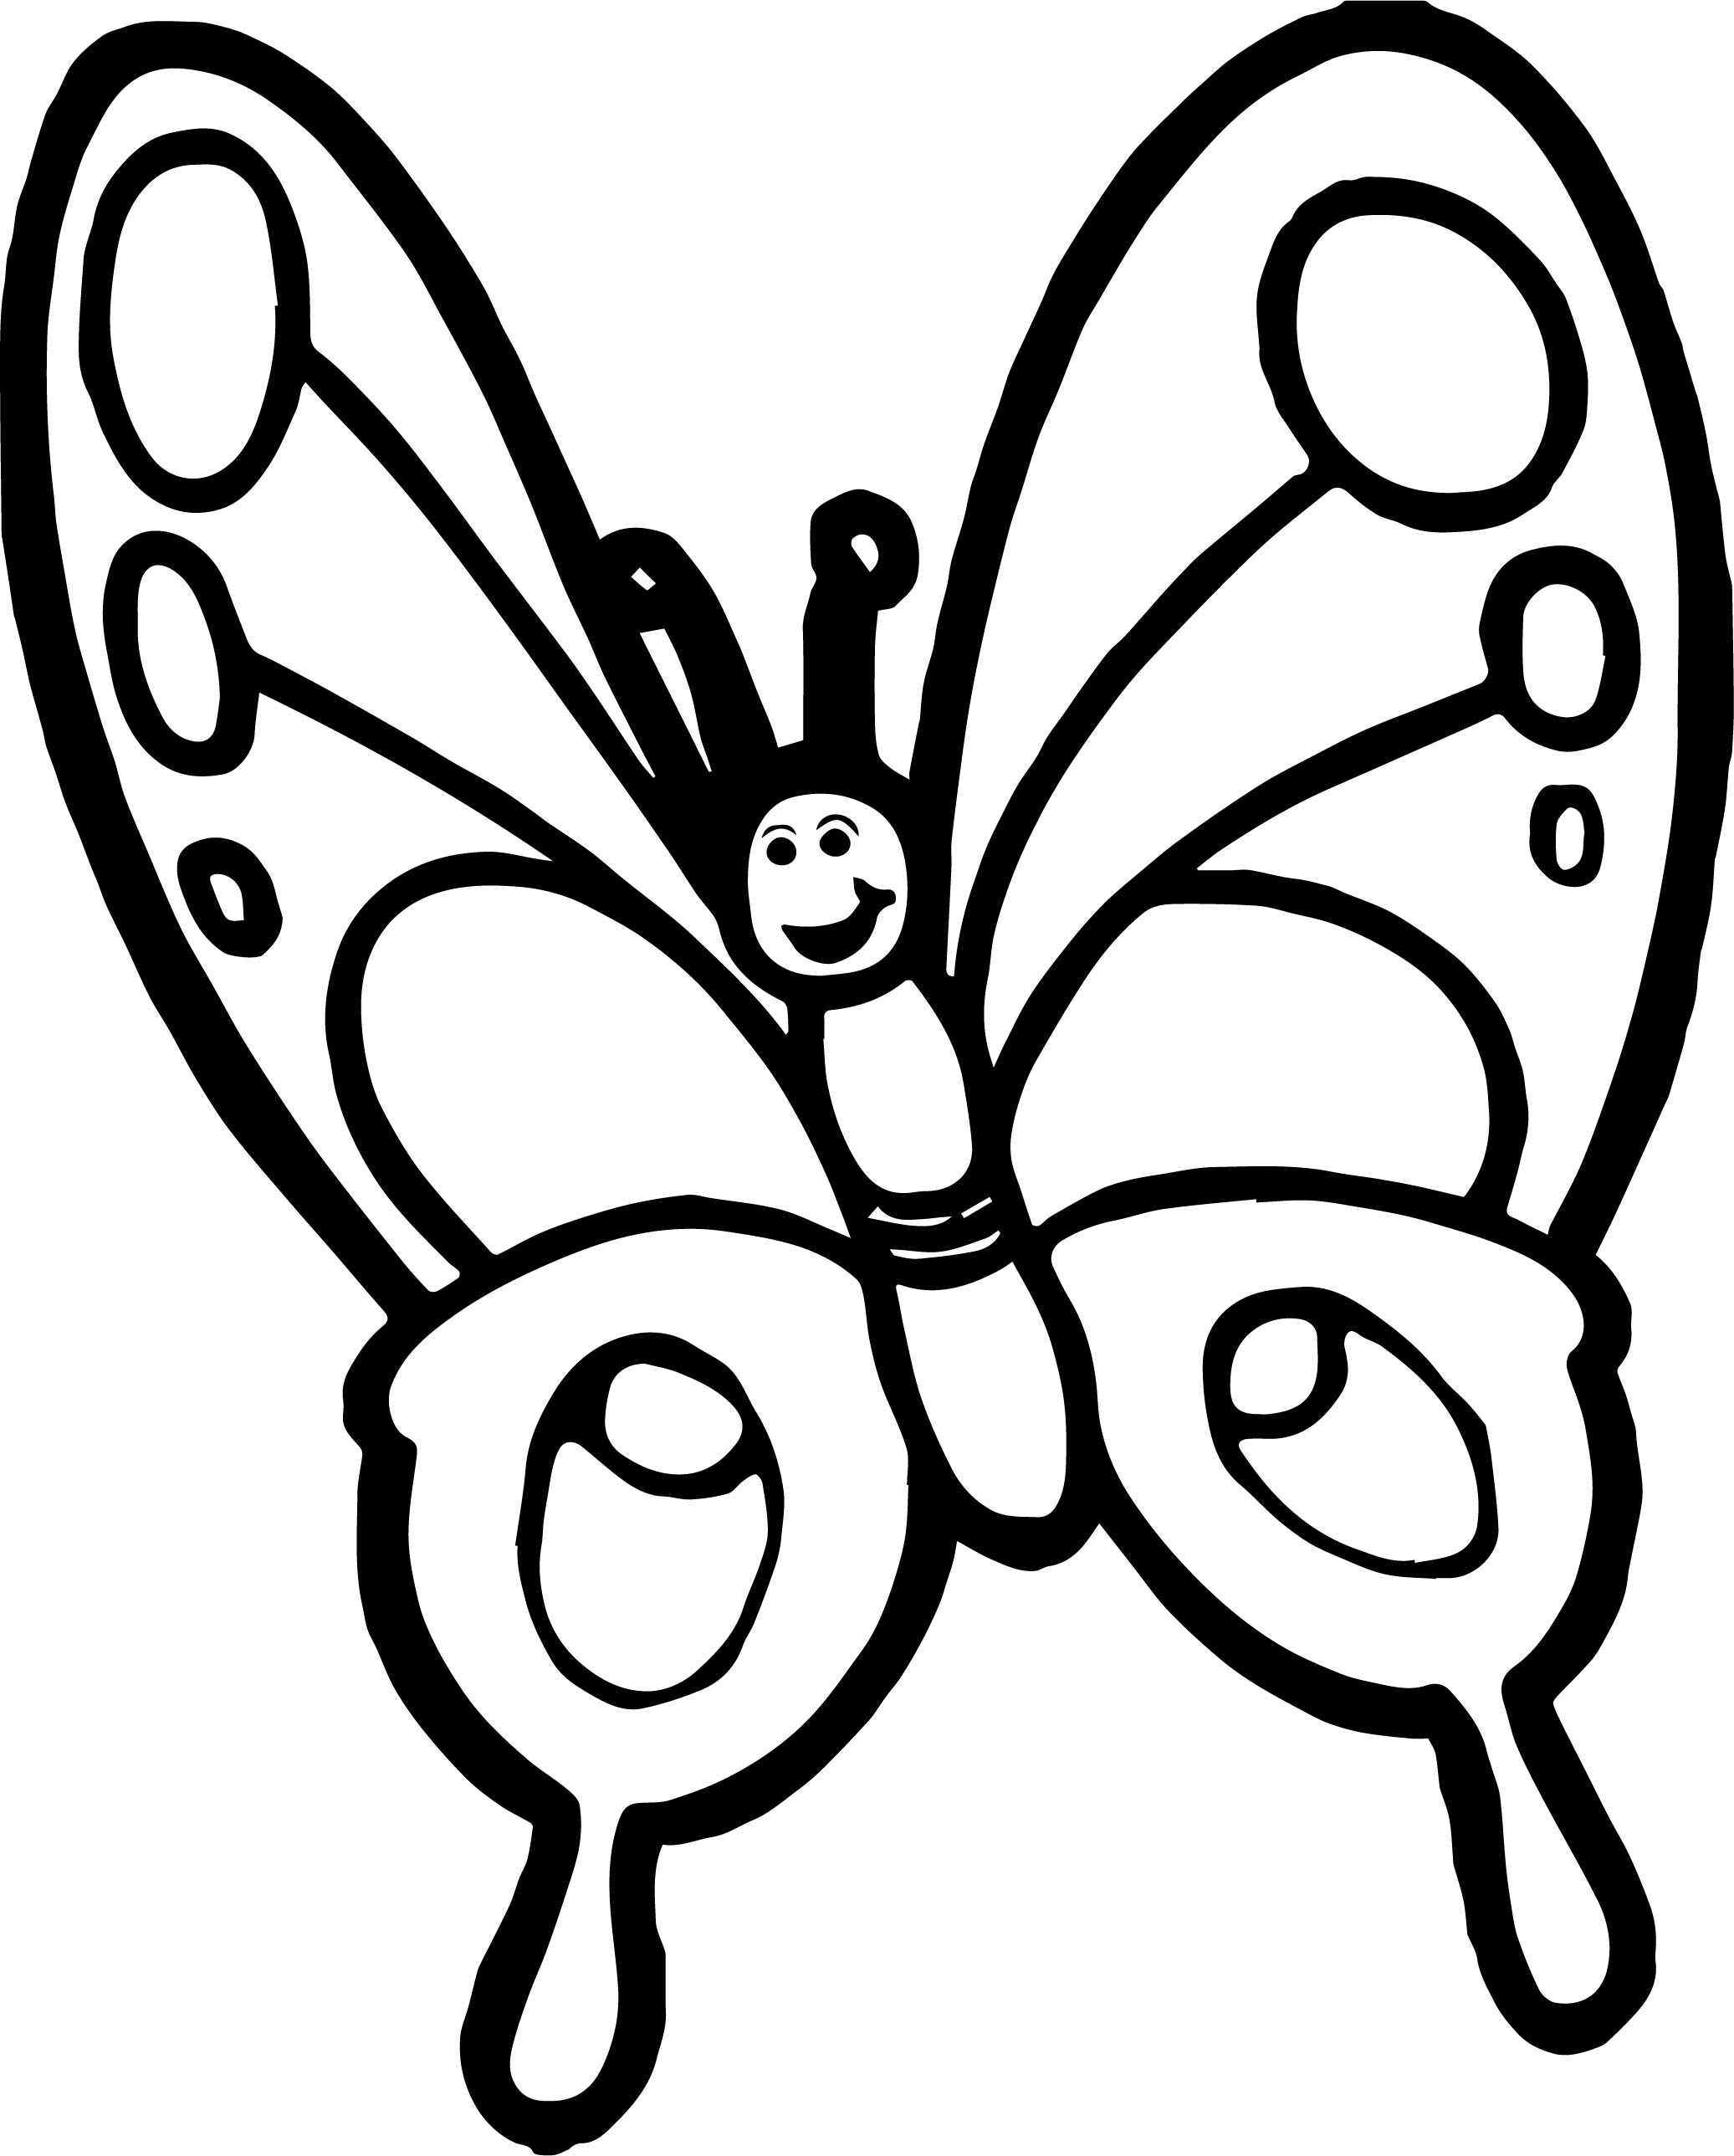 Cartoon Butterfly Coloring Pages At Getdrawings | Free Download